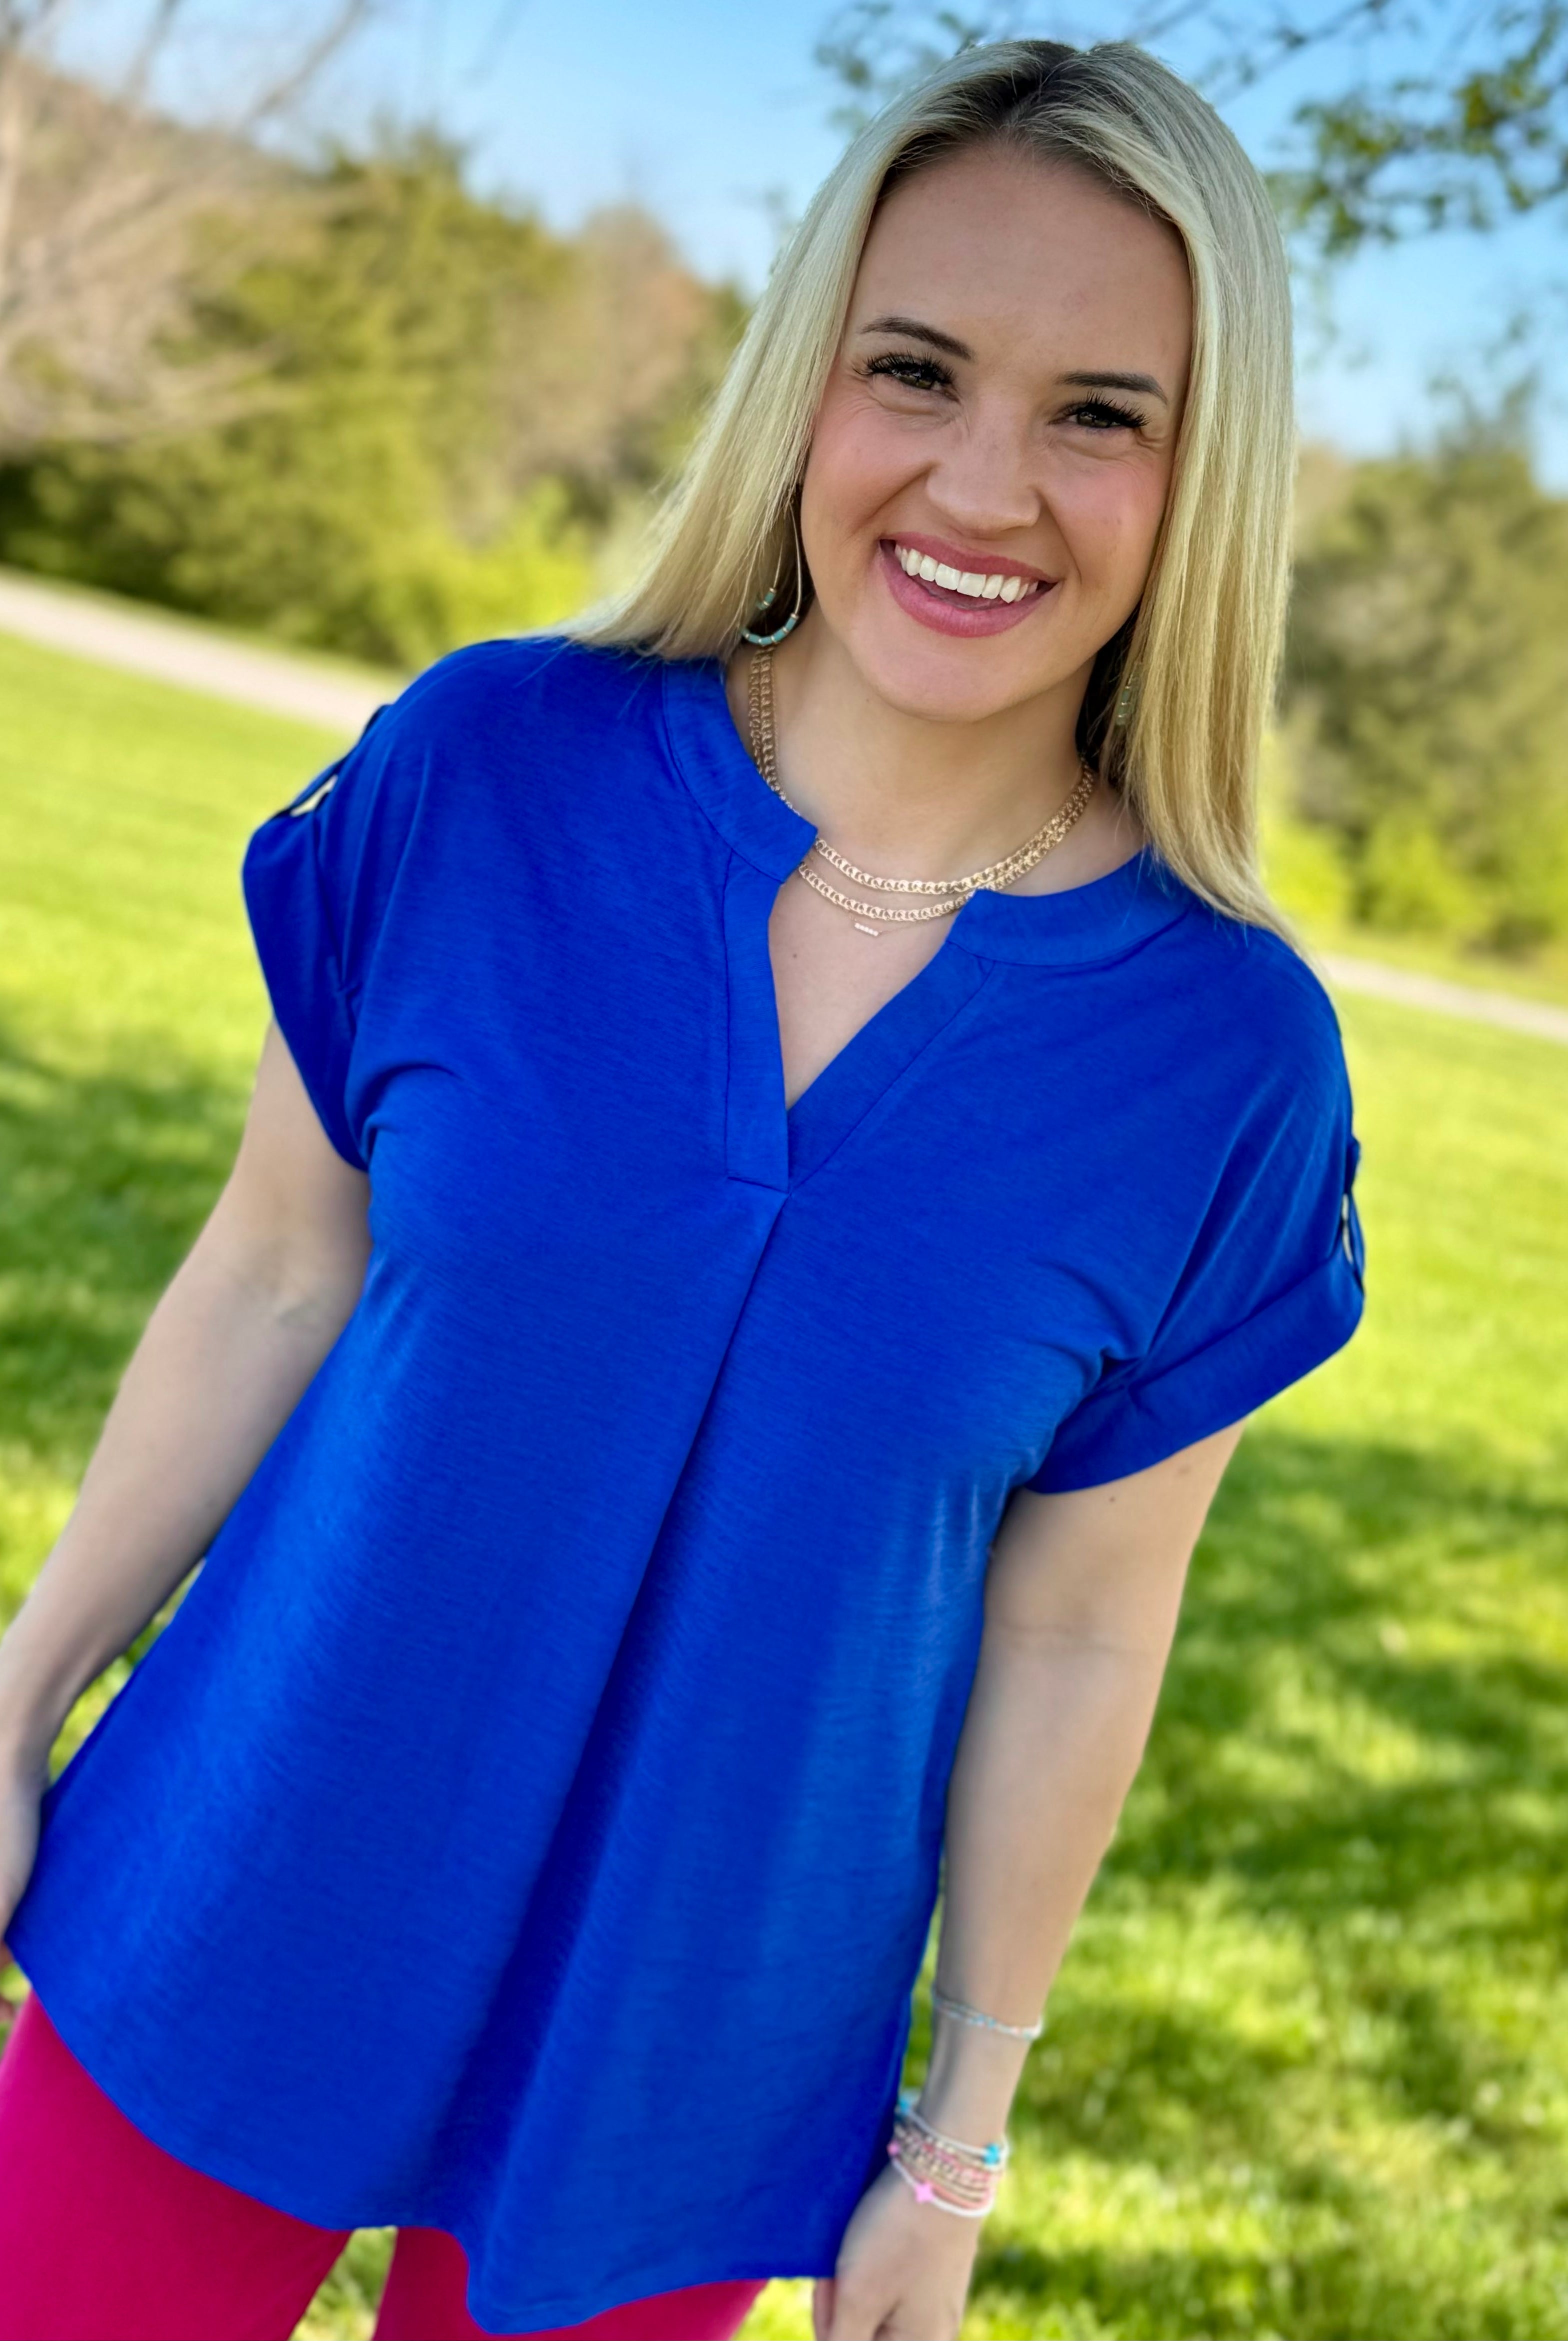 Bright & Beautiful Short Sleeve Top - Royal Blue-Tops-The Lovely Closet-The Lovely Closet, Women's Fashion Boutique in Alexandria, KY